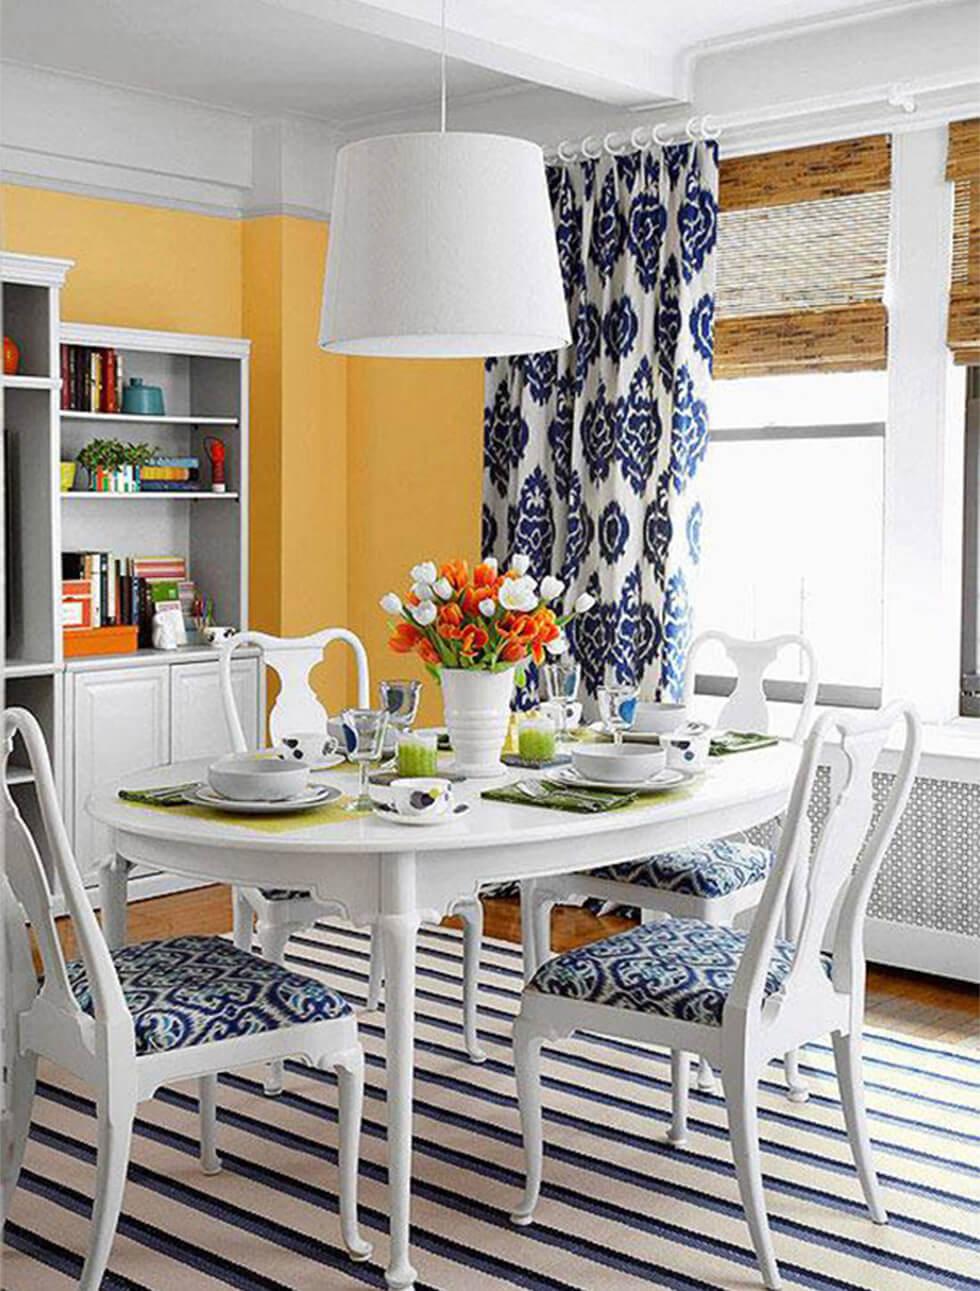 marigold orange walls in a French farmhouse dining room